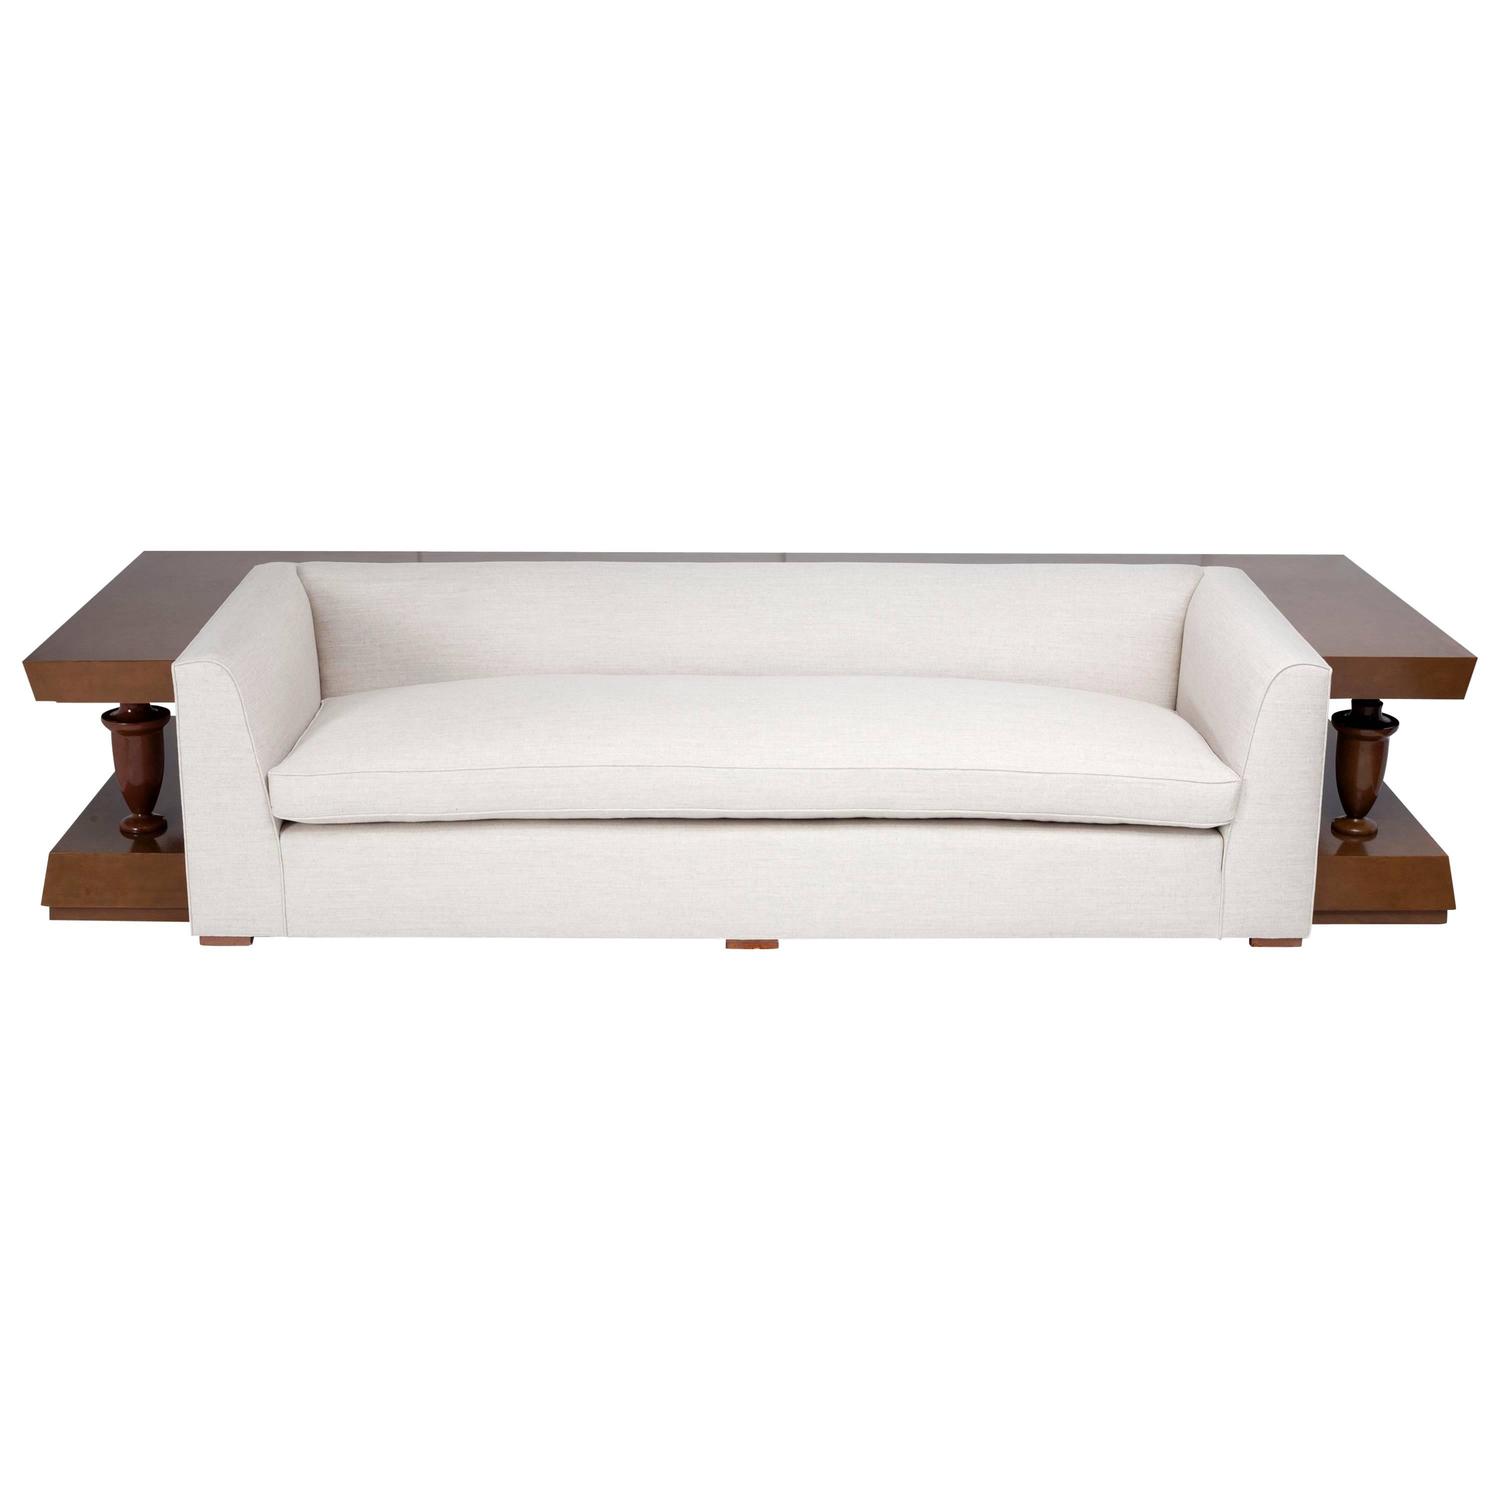 Large Sofa with Wood Surround by James Mont For Sale at